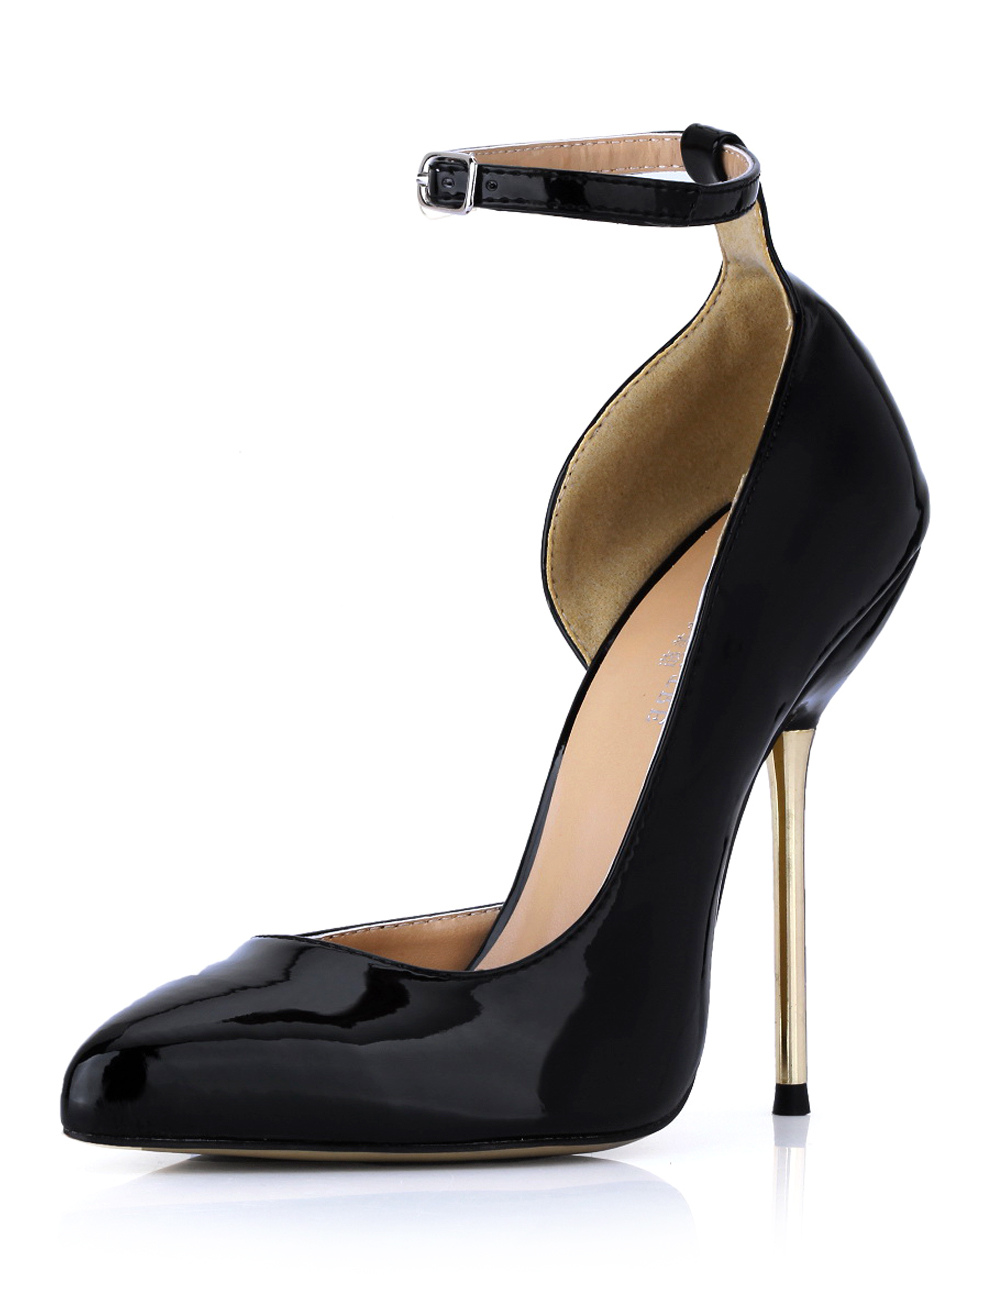 Black Stiletto Heel Ankle Strap Patent Leather Woman's High Heels ...